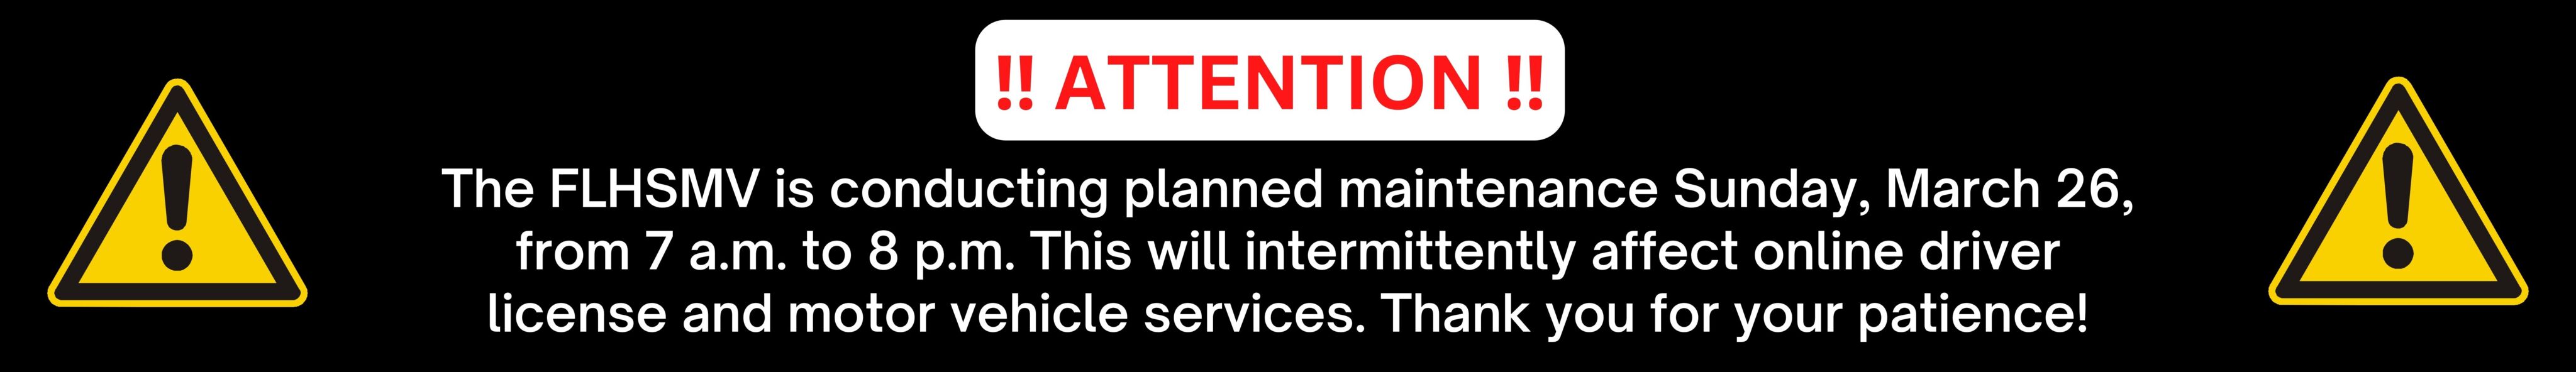 Attention - the FLHSMV is conducting planned maintenance Sunday, March 26, from 7 a.m. to 8 p.m. This will intermittently affect online driver license and motor vehicle services. Thank you for your patience!